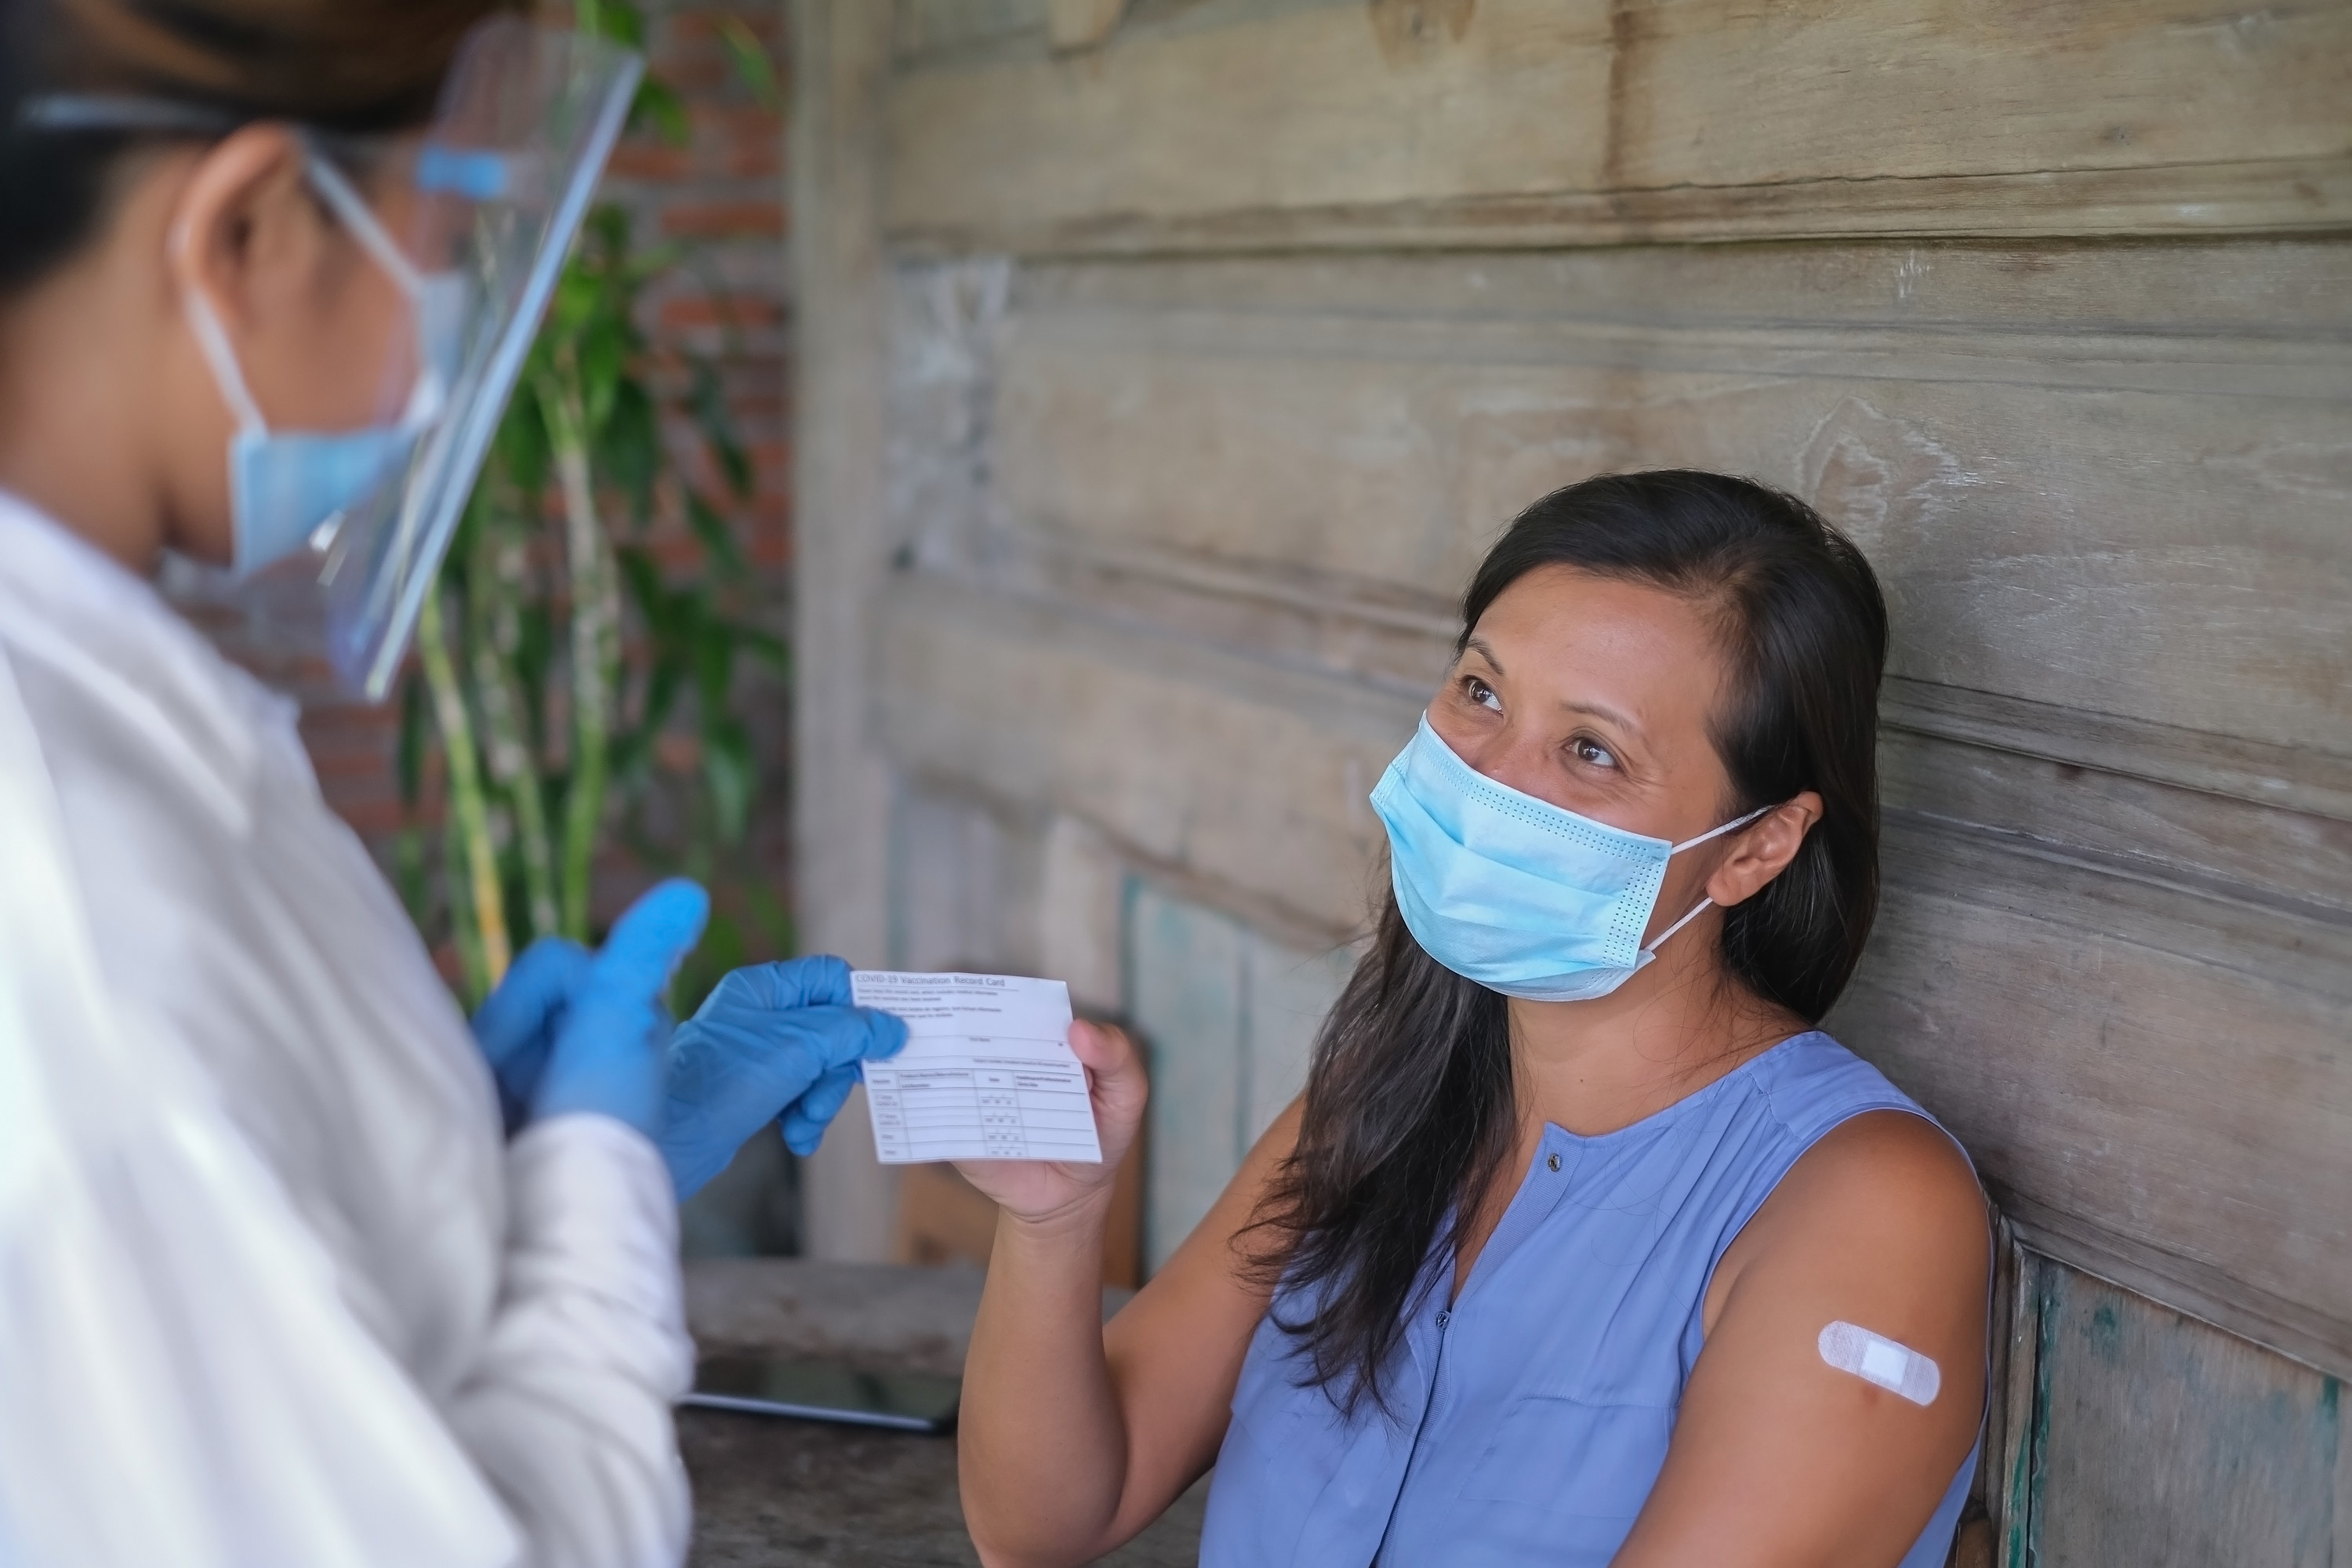 Woman with protective face mask receiving a COVID-19 vaccination record card from a healthcare worker